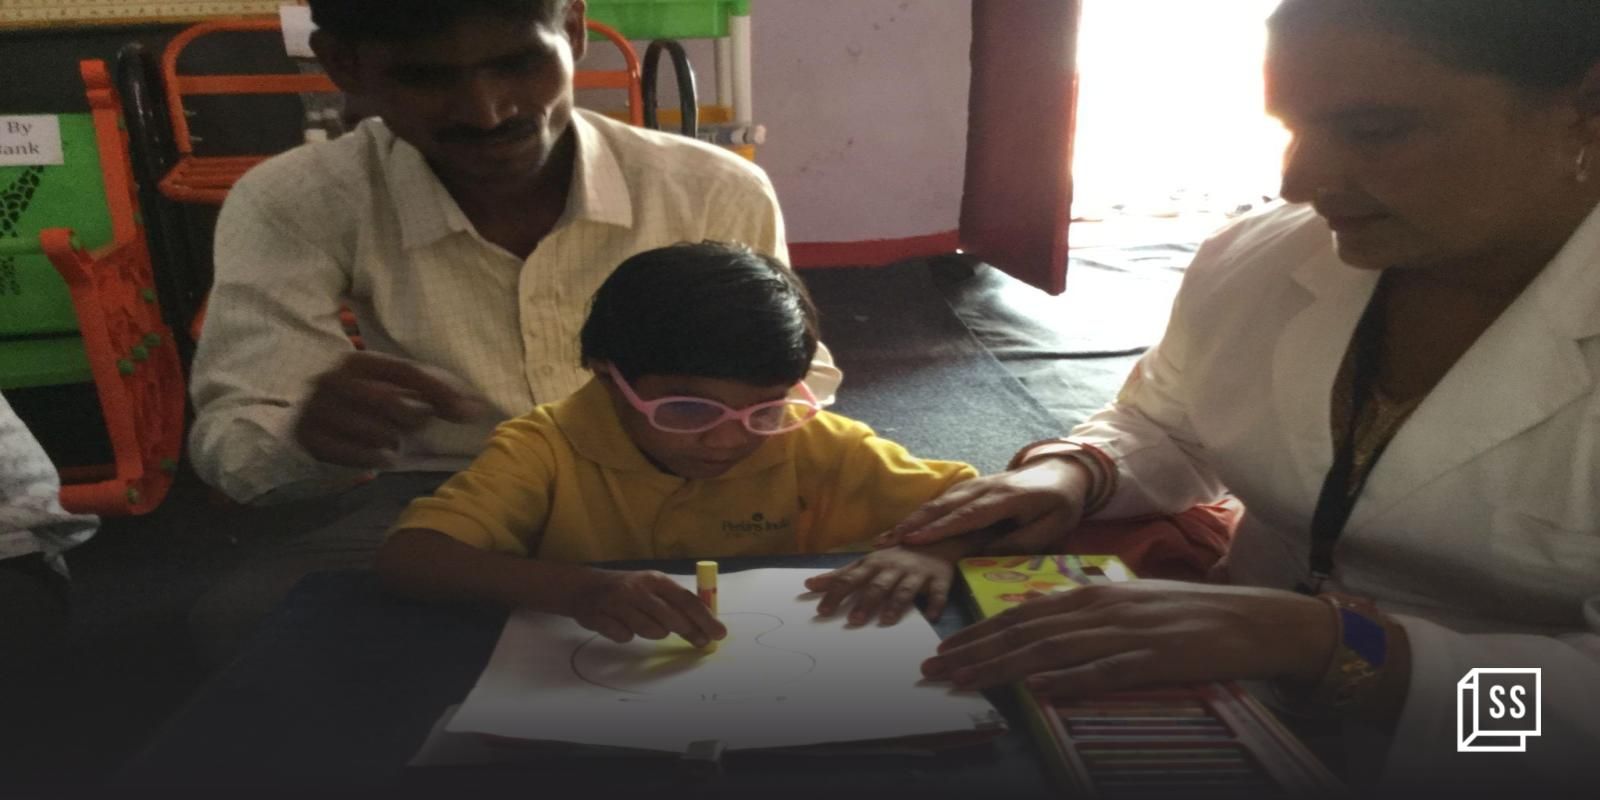 Perkins India aims to make a difference in the lives of children with disabilities through health and education